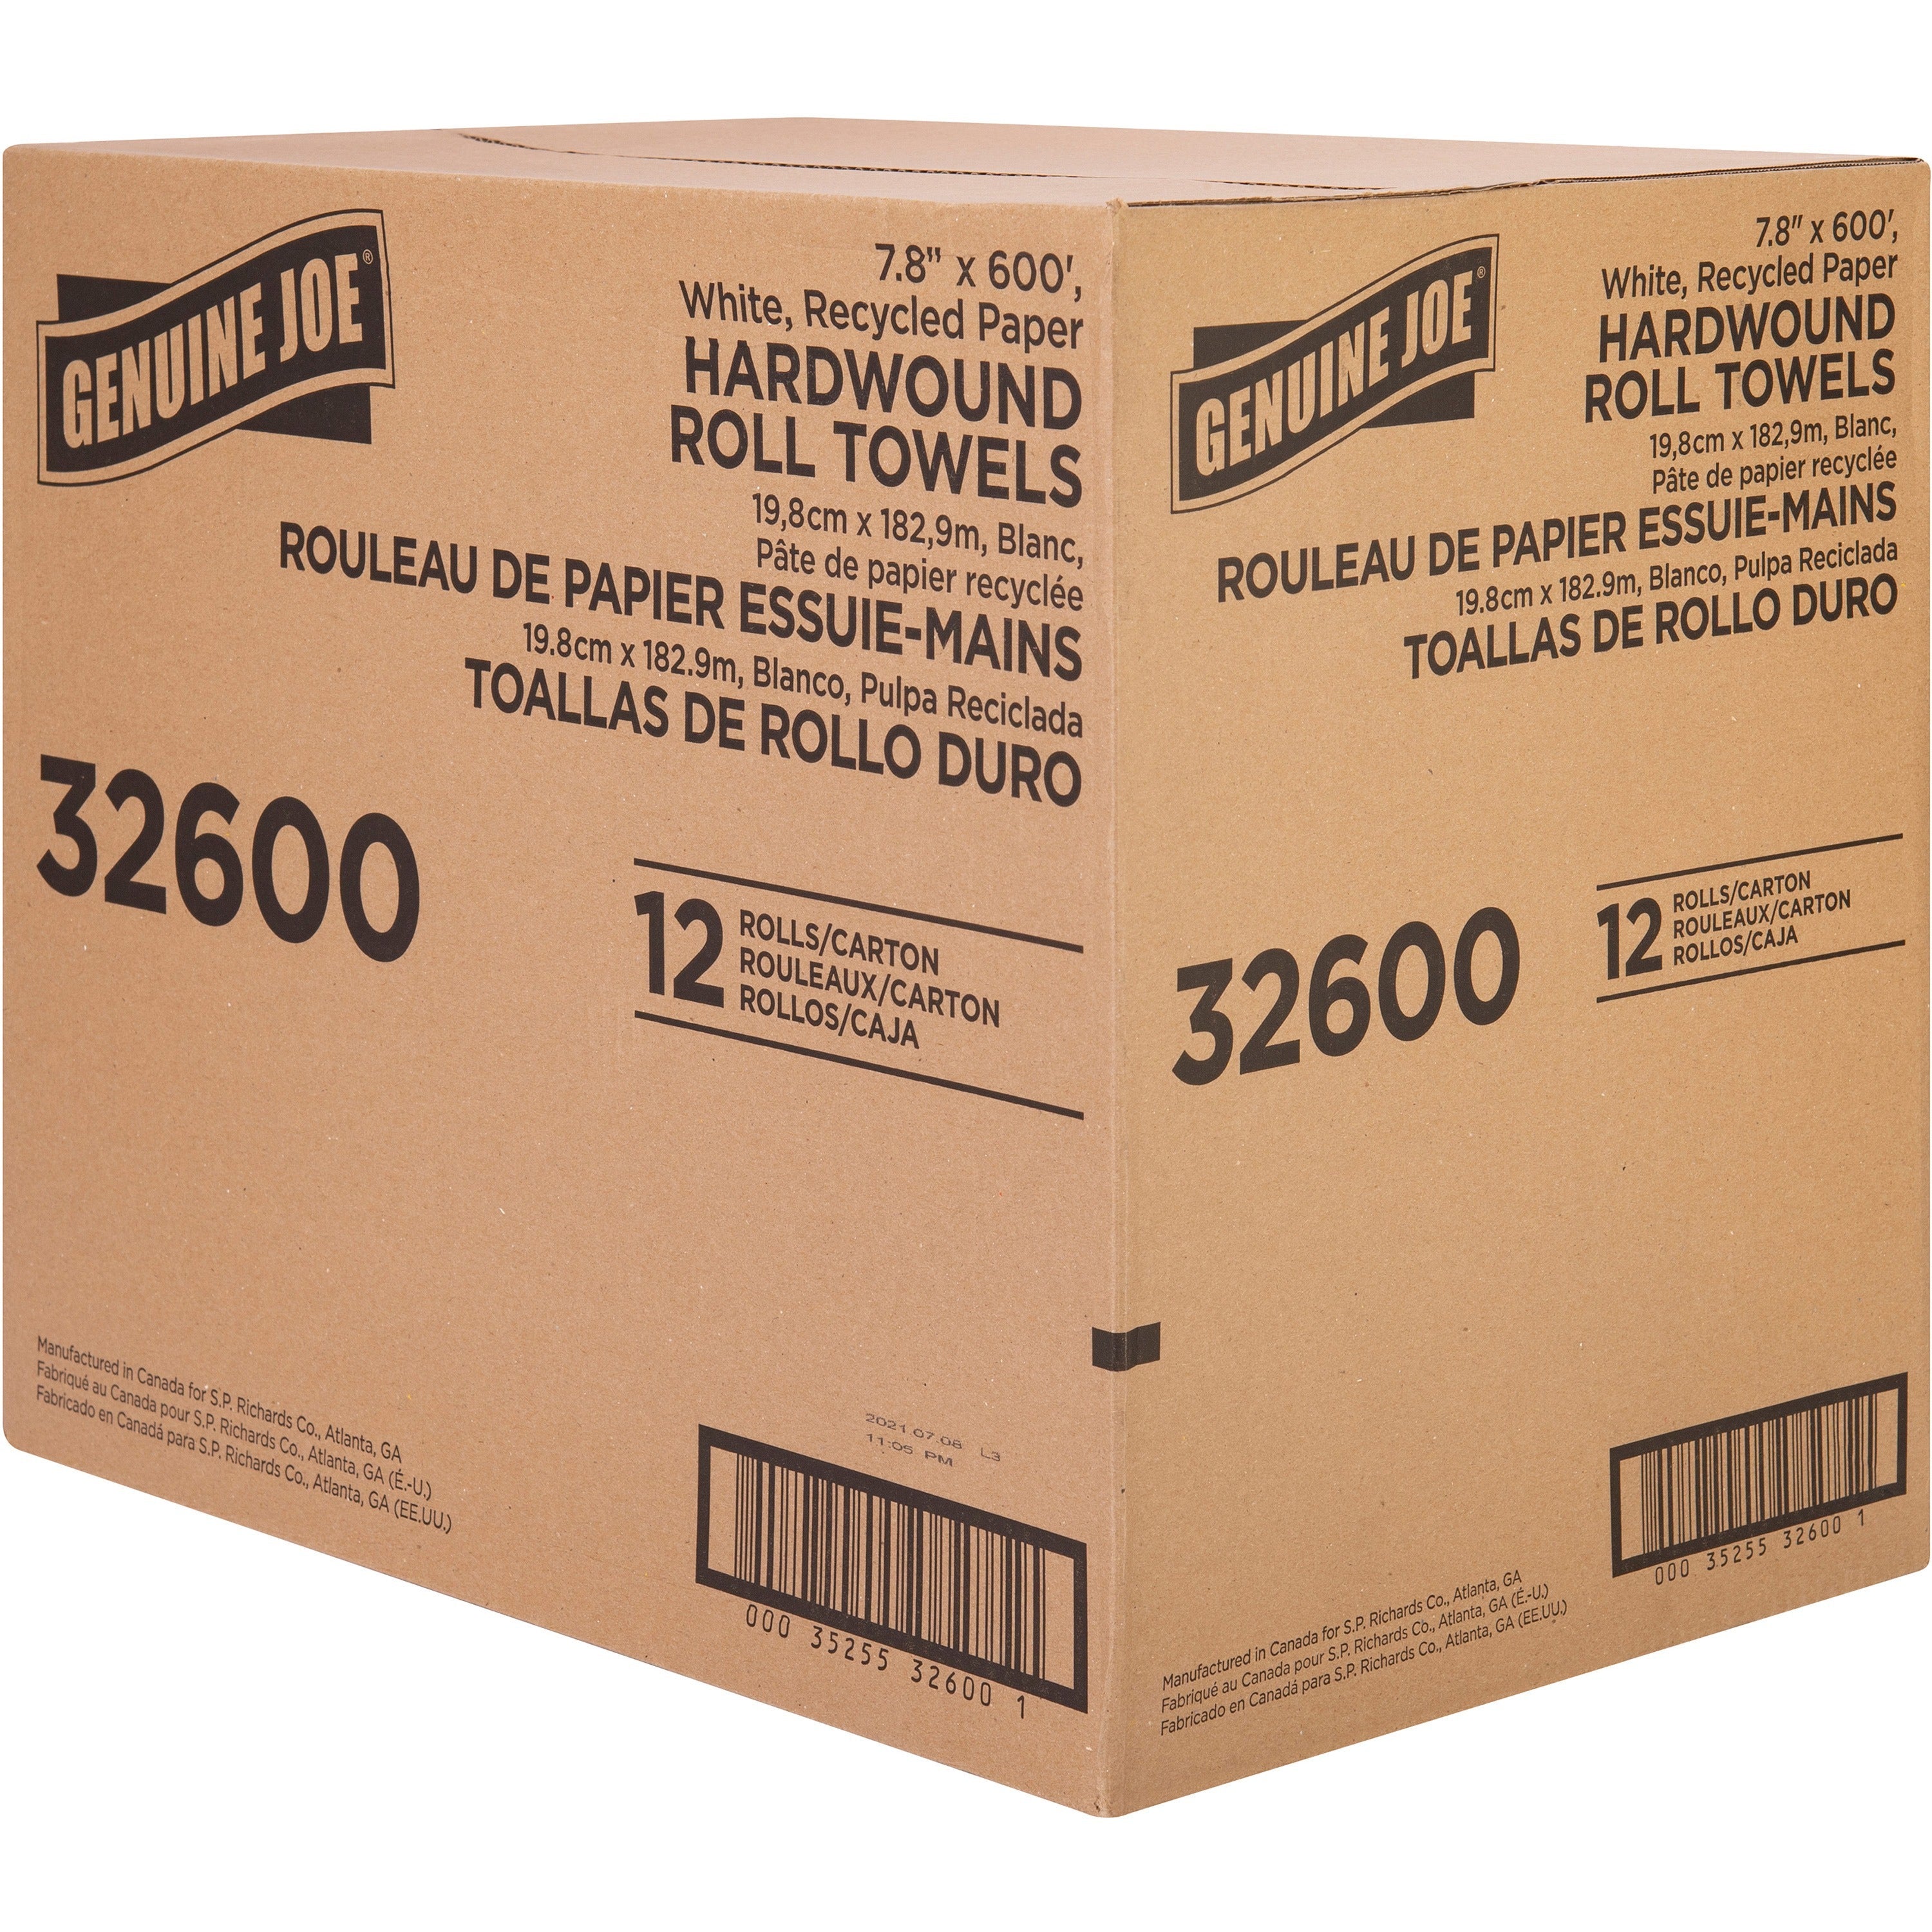 genuine-joe-hardwound-roll-paper-towels-780-x-600-ft-2-core-white-paper-absorbent-for-restroom-12-carton_gjo32600 - 4